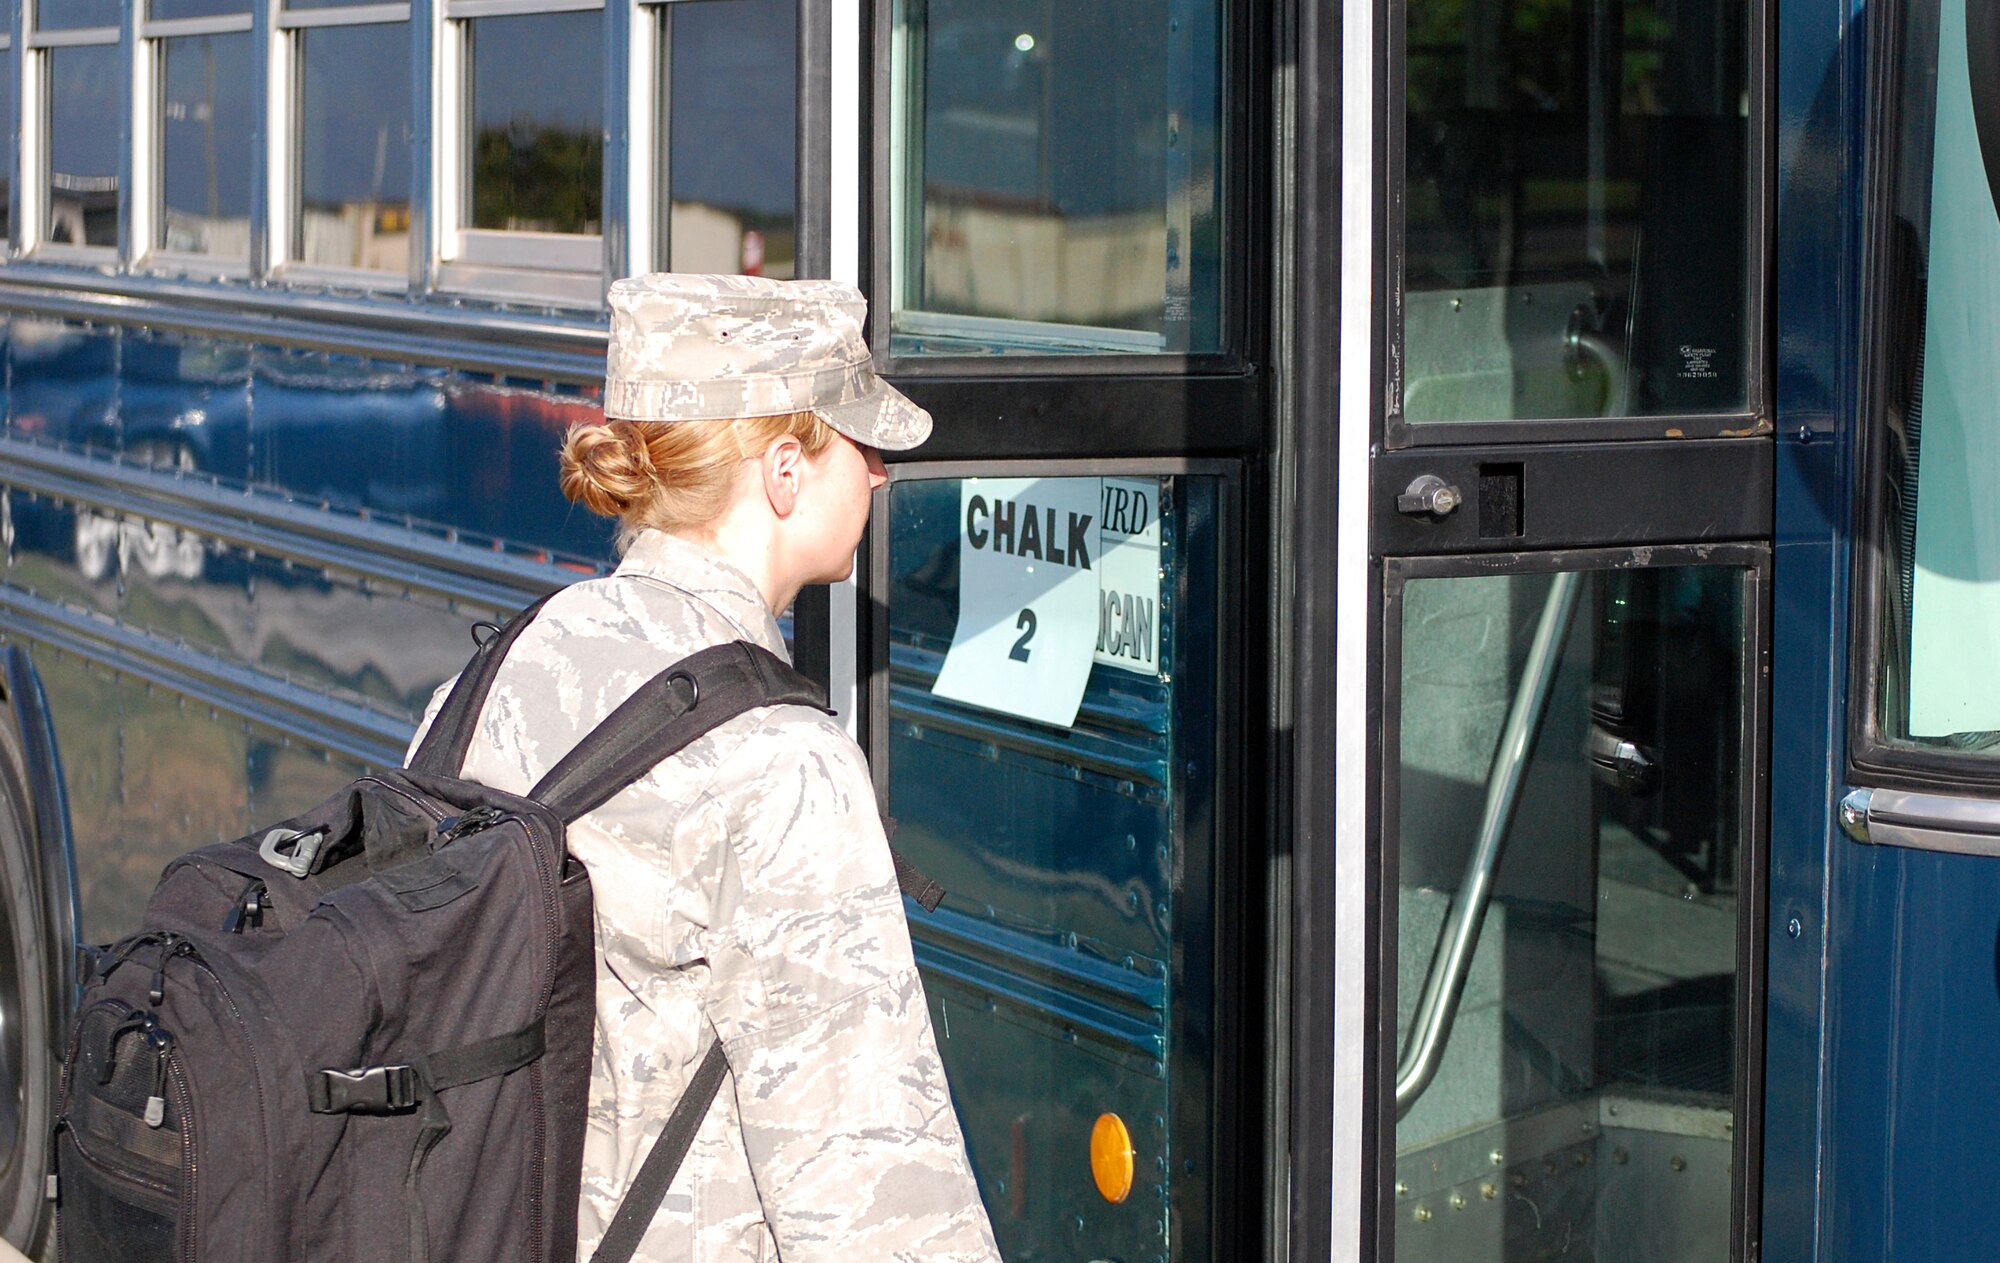 Capt. Rose Richeson, Air Education and Training Command Public Affairs Unit Deployment manager, boards the bus to the 902nd Logistics Readiness Squadron Deployment Processing Center on Randolph Air Force Base Aug. 10 during deployment exercise Joint Base San Antonio 10-08. More than 200 Airmen from different agencies on Randolph AFB participated in the two-day deployment exercise. (U.S. Air Force photo/Master Sgt. Paul Kilgallon)